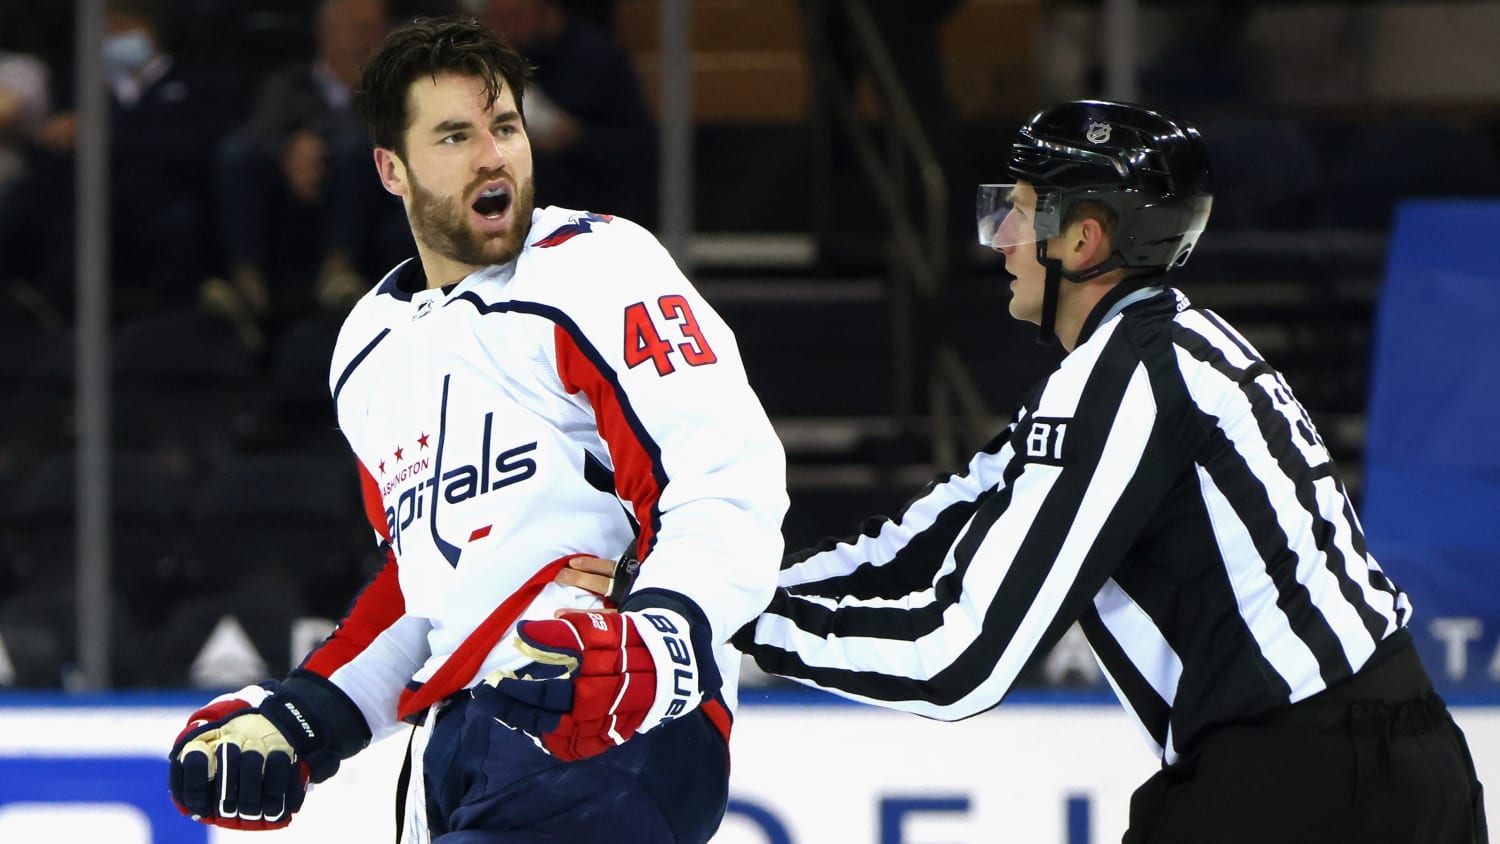 Capitals' Tom Wilson says he initially thought Monday's Rangers dustup was 'routine hockey scrum'